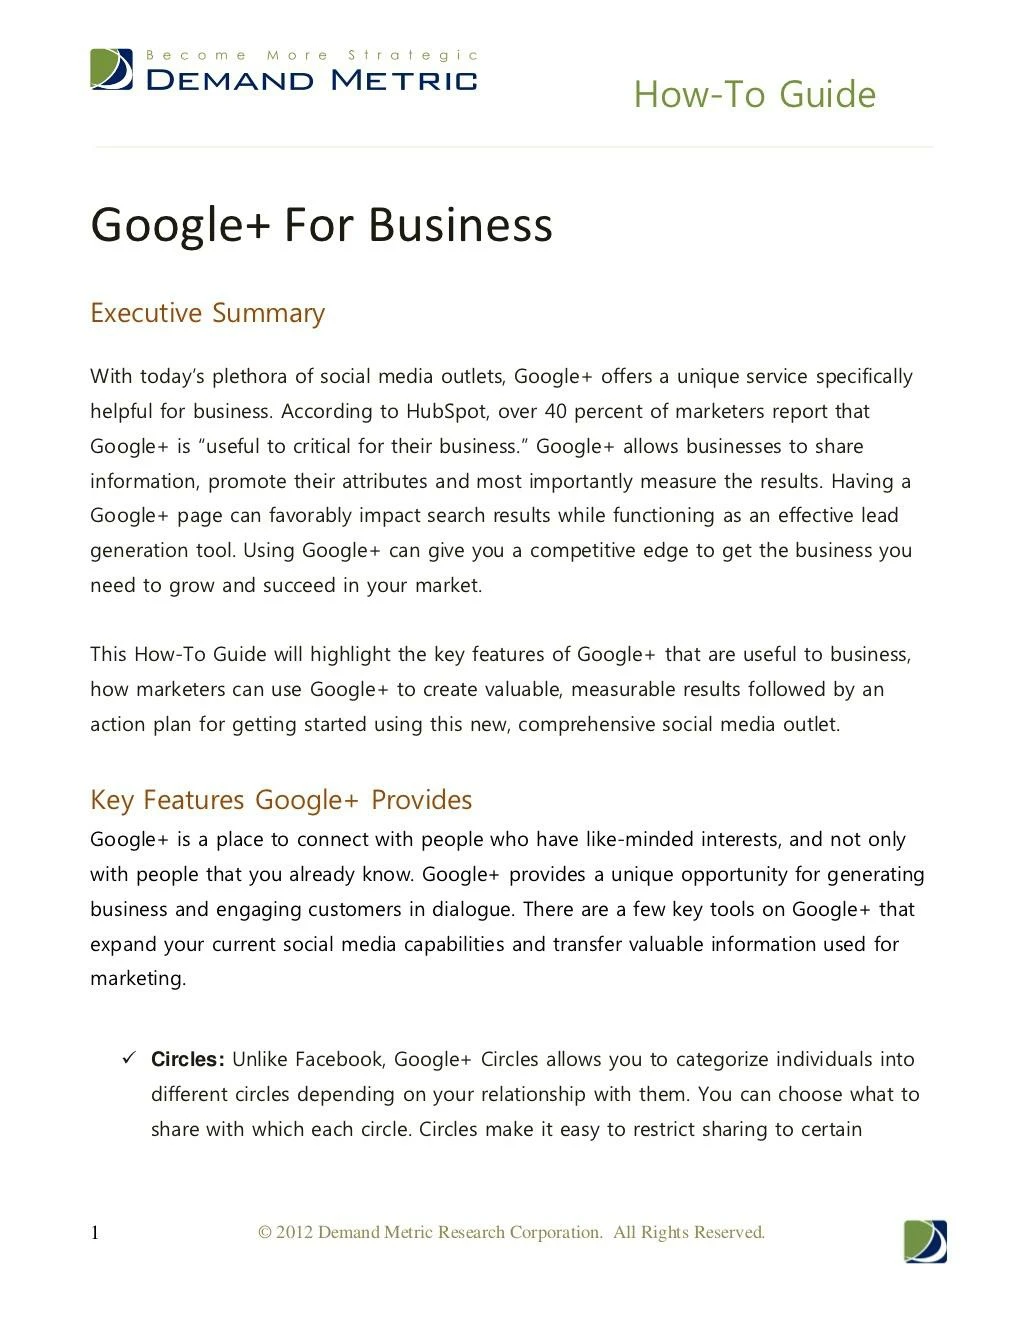 using google for business